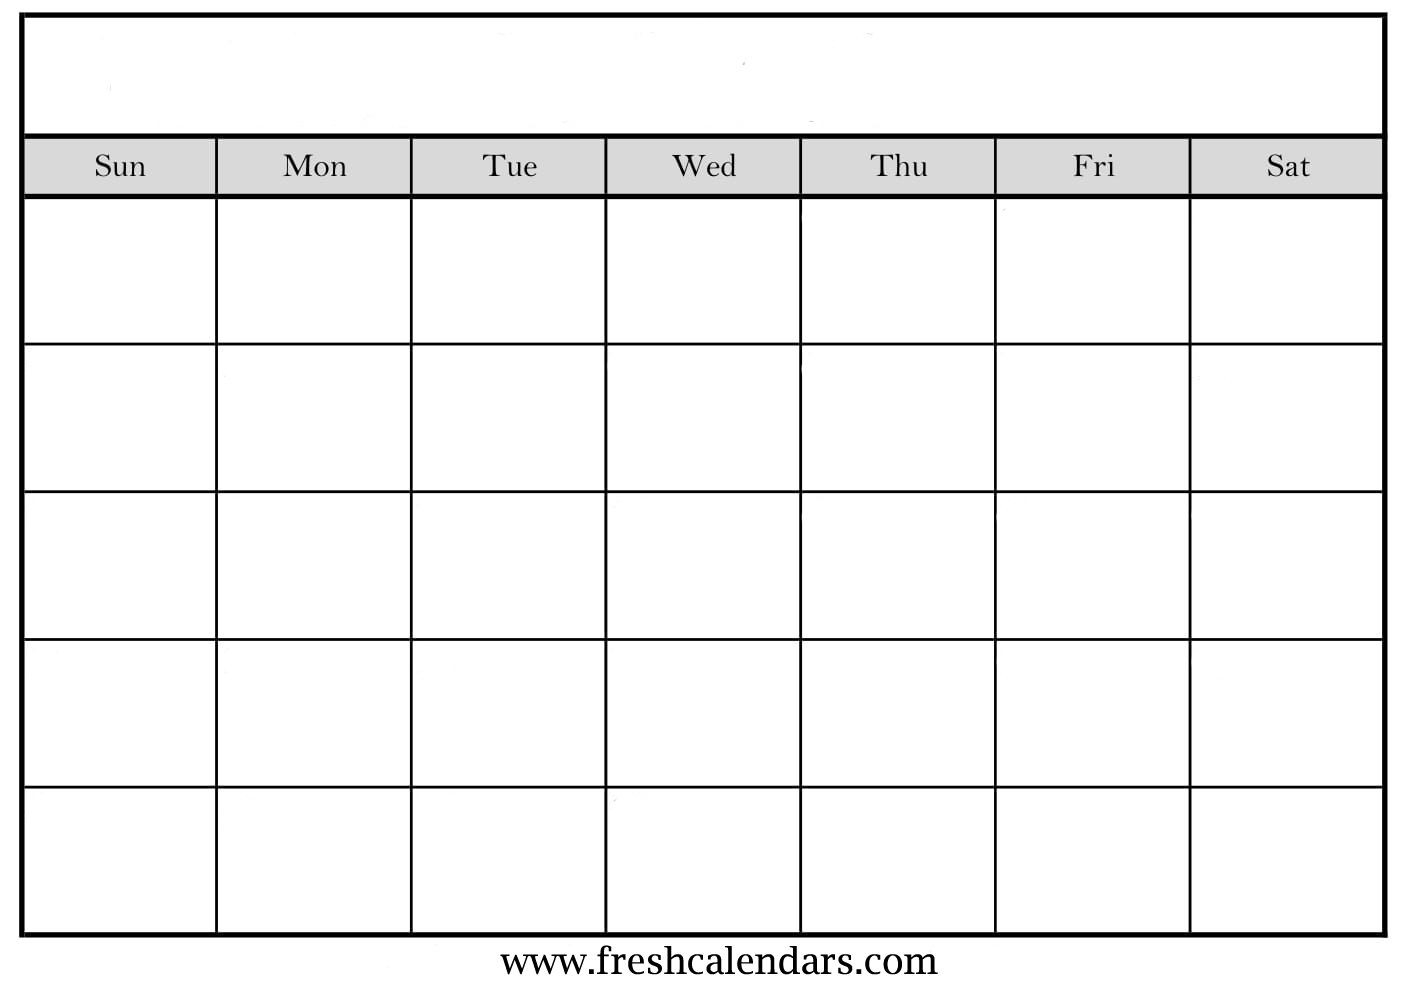 Blank Calendar: Wonderfully Printable 2019 Templates-Blank Calender Template That I Can Type In